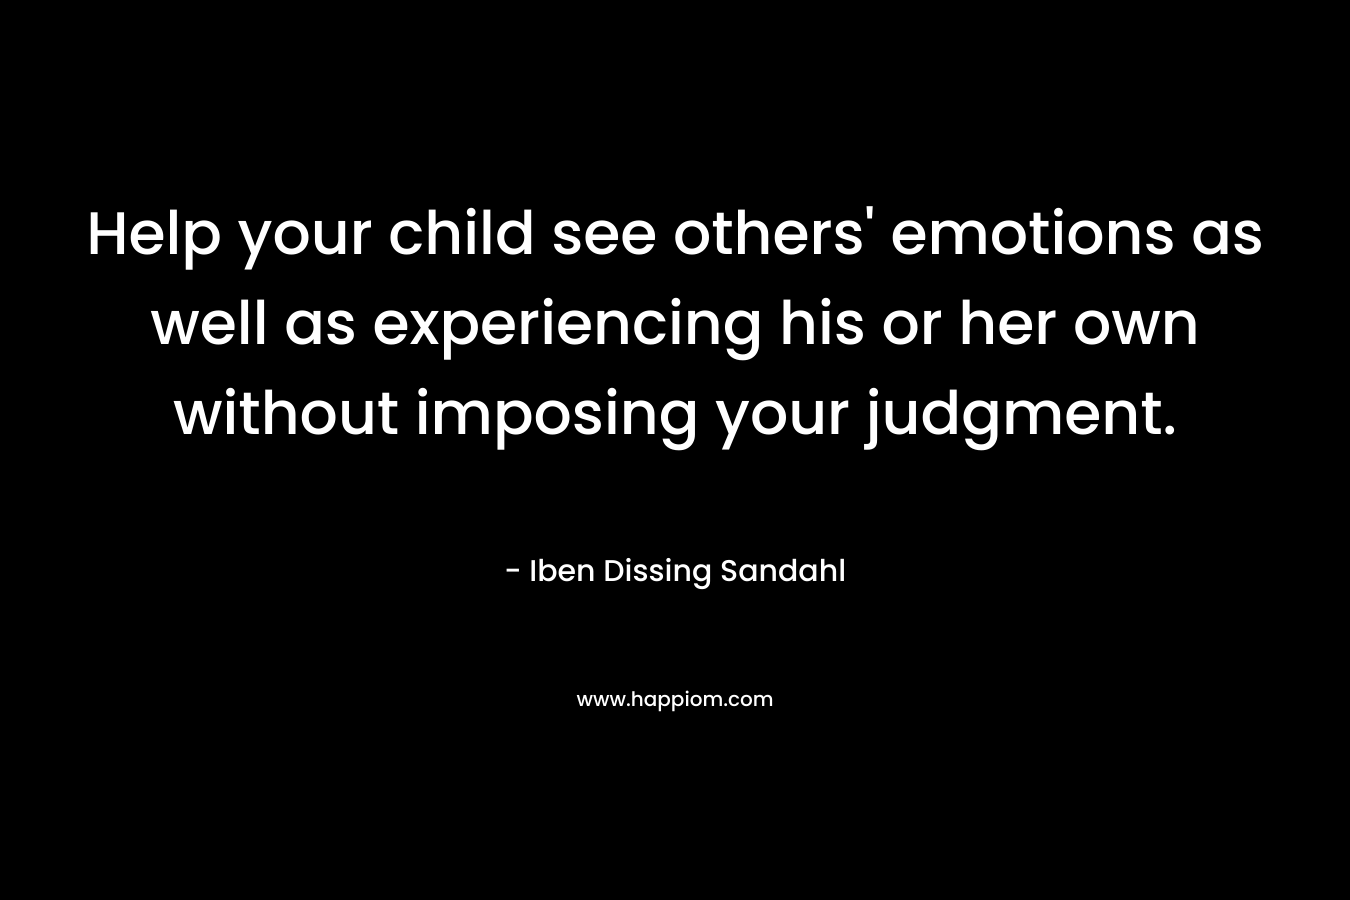 Help your child see others' emotions as well as experiencing his or her own without imposing your judgment.